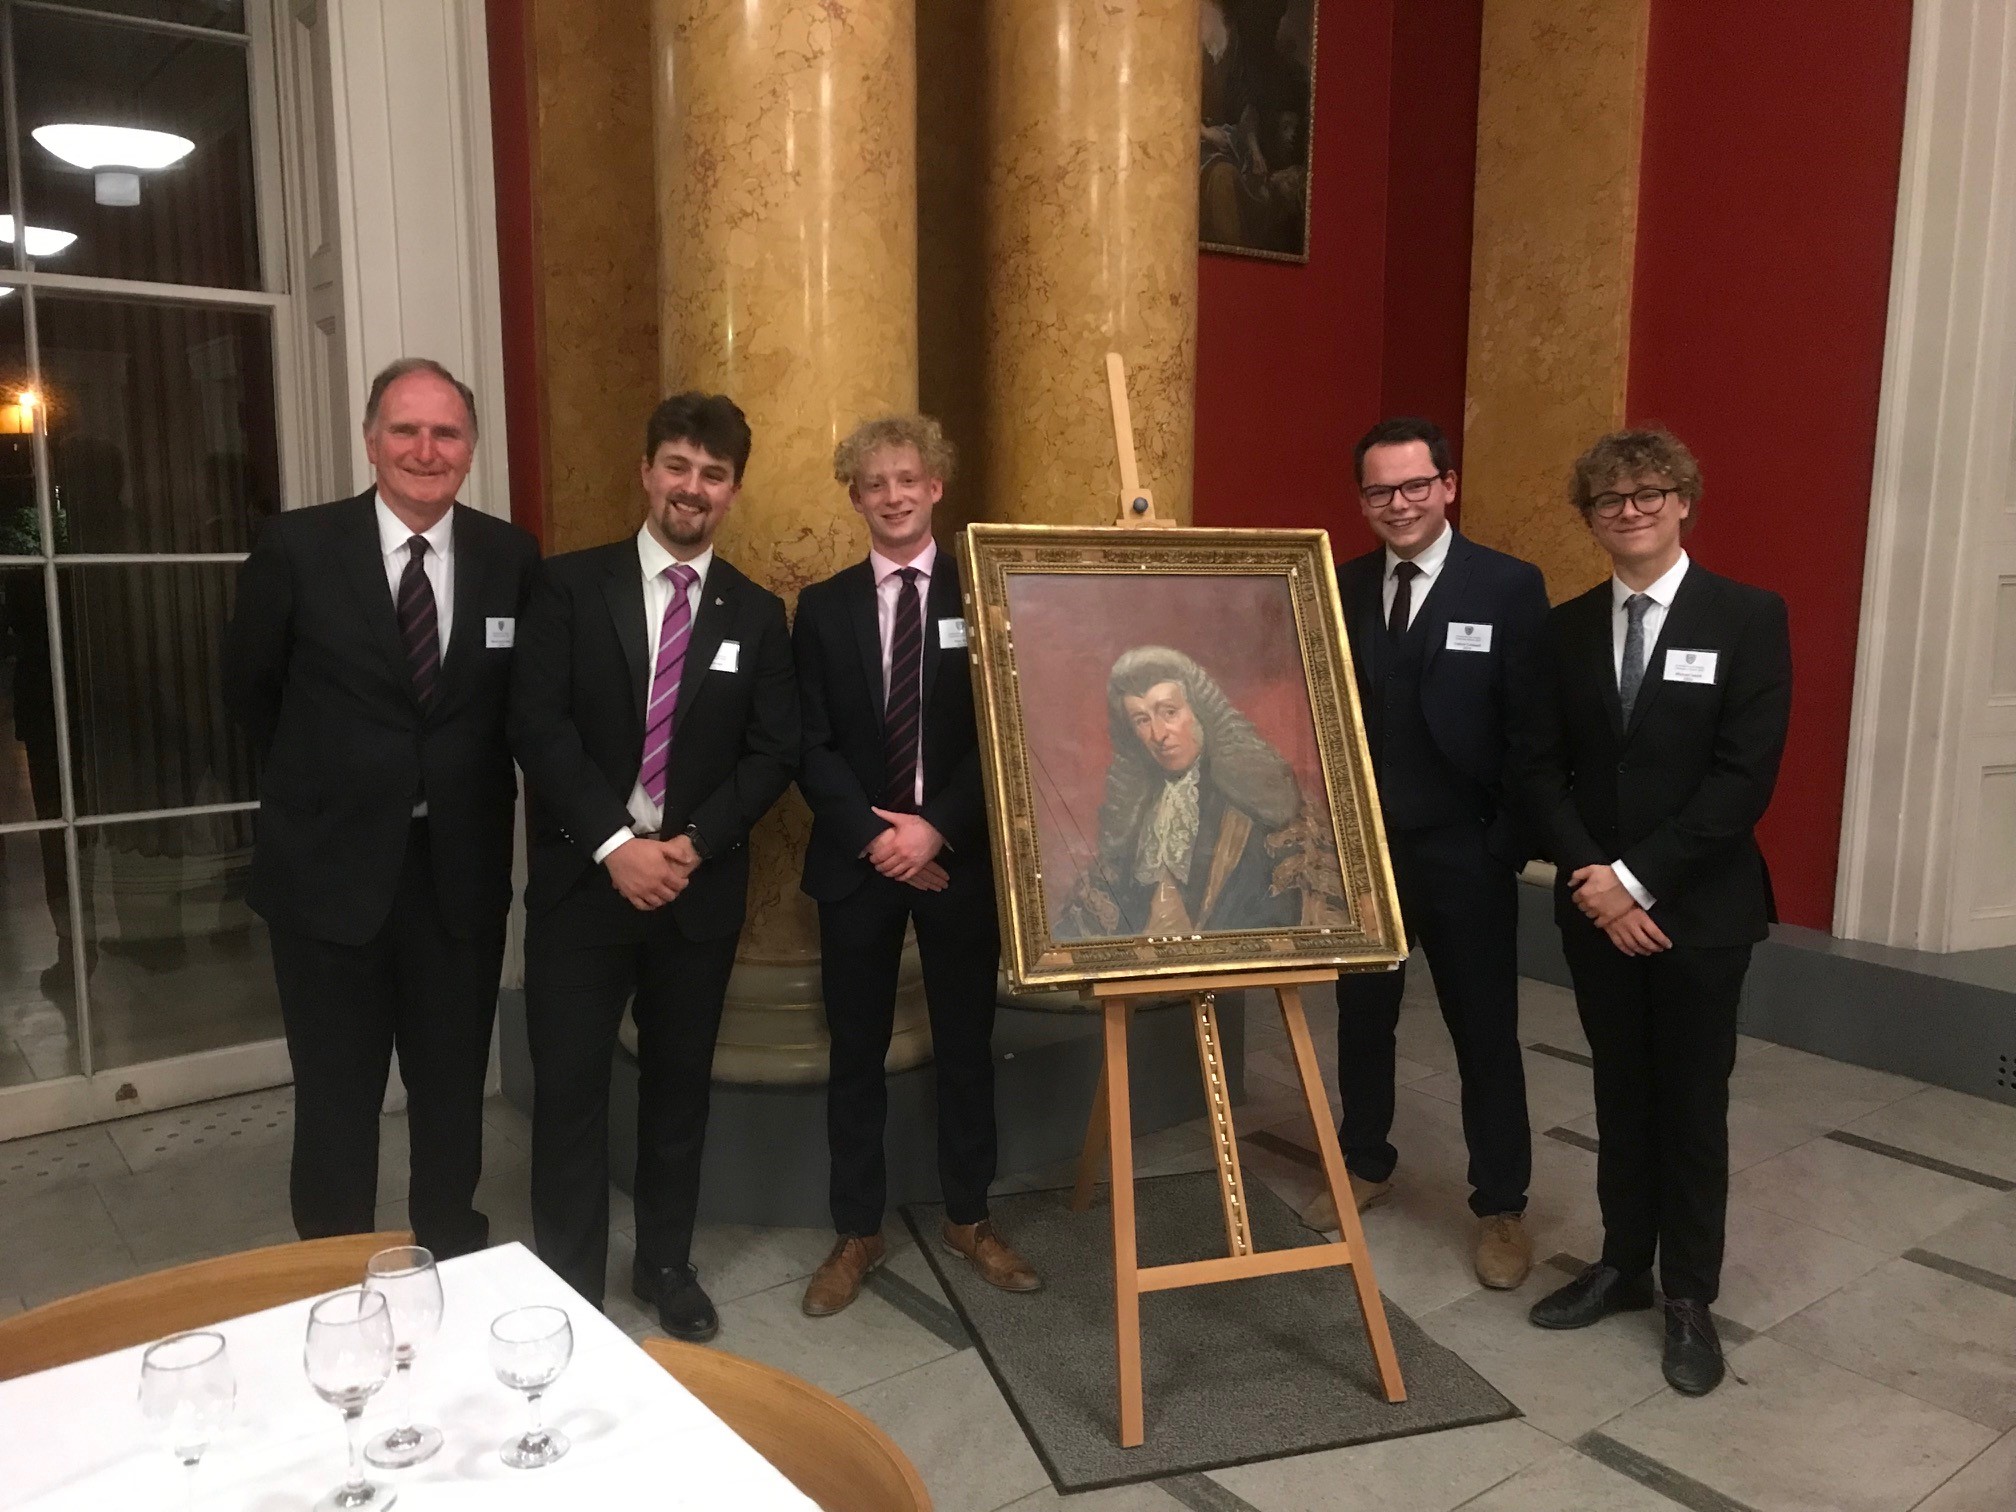 Cranwirth dinner group with portrait, 2022